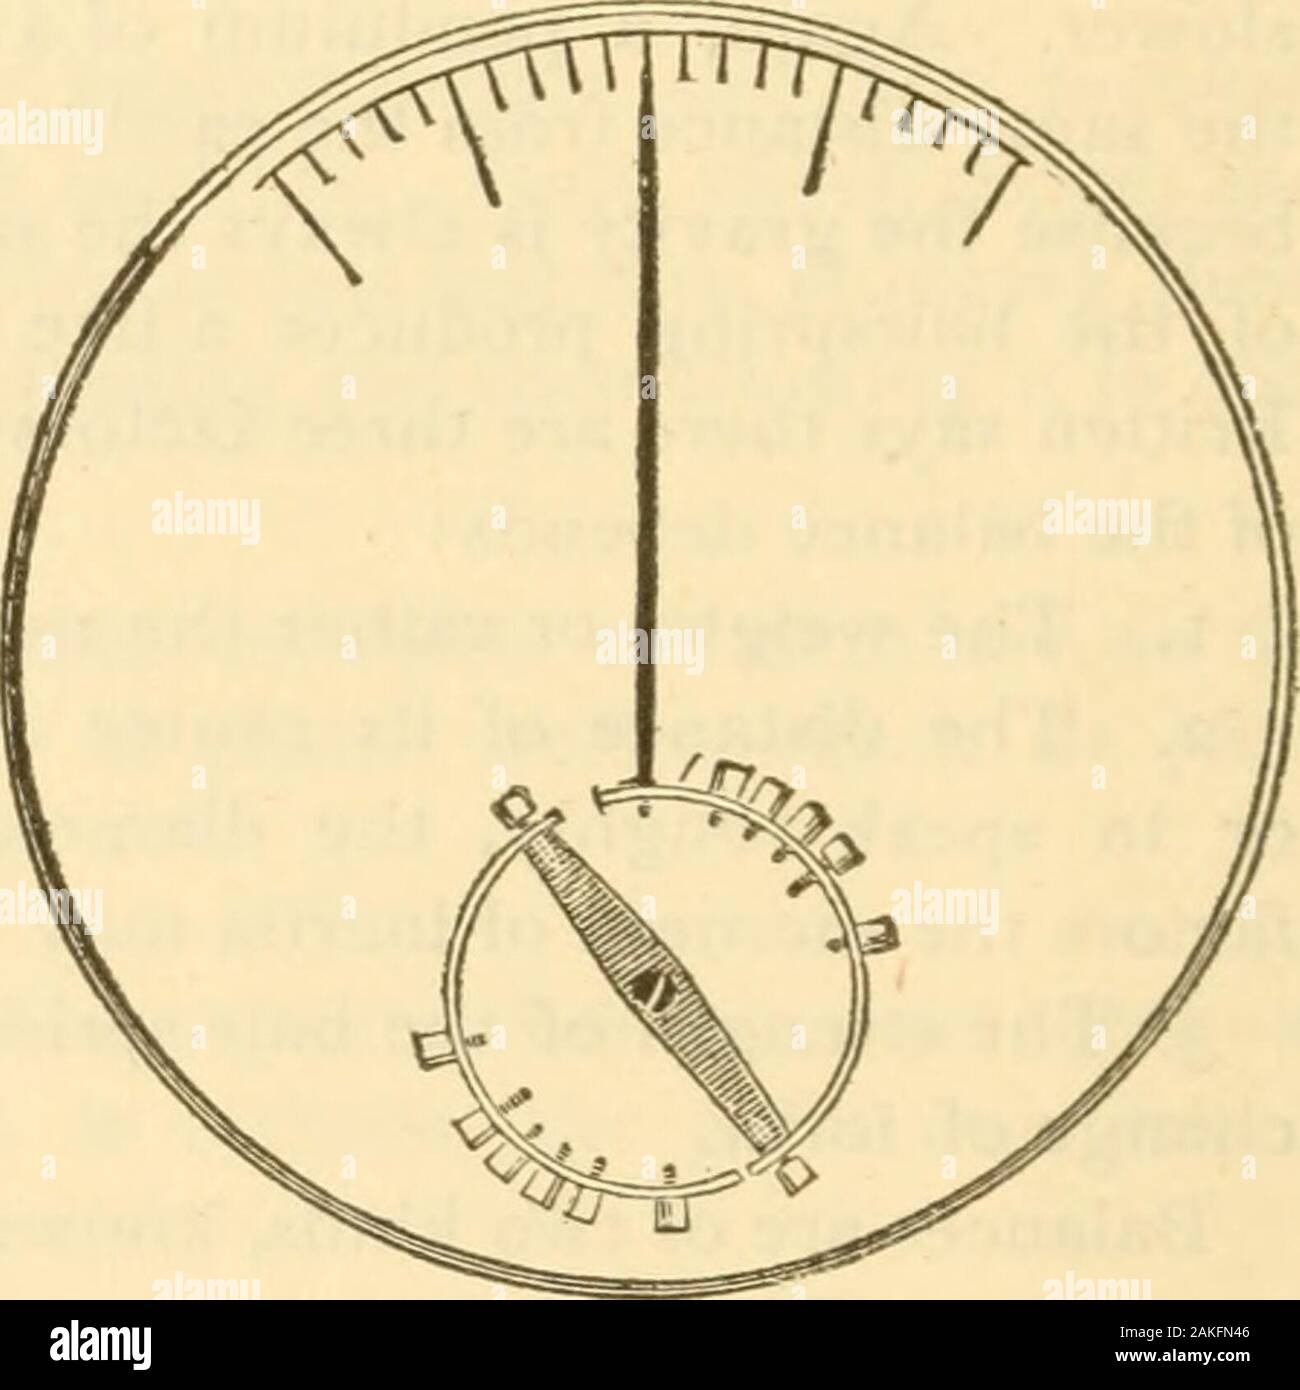 The American watchmaker and jeweler; an encyclopedia for the horologist, jeweler, gold and silversmith .. . he scale. Fig. 10 illustrates theexpansion and contraction of bal-ances. With an increase of tempera-ture the rim is bent inward, thusreducing the size of the balance.This is owing to the fact that brassexpands more than steel, and inendeavoring to expand it bends therim inward. The action is, of course,reversed by lowering the tempera-ture below normal. Some adjustersspin a balance close to the flame of a ^/g. &lt;,. lamp before using, in order to subject it to a higher temperature than Stock Photo